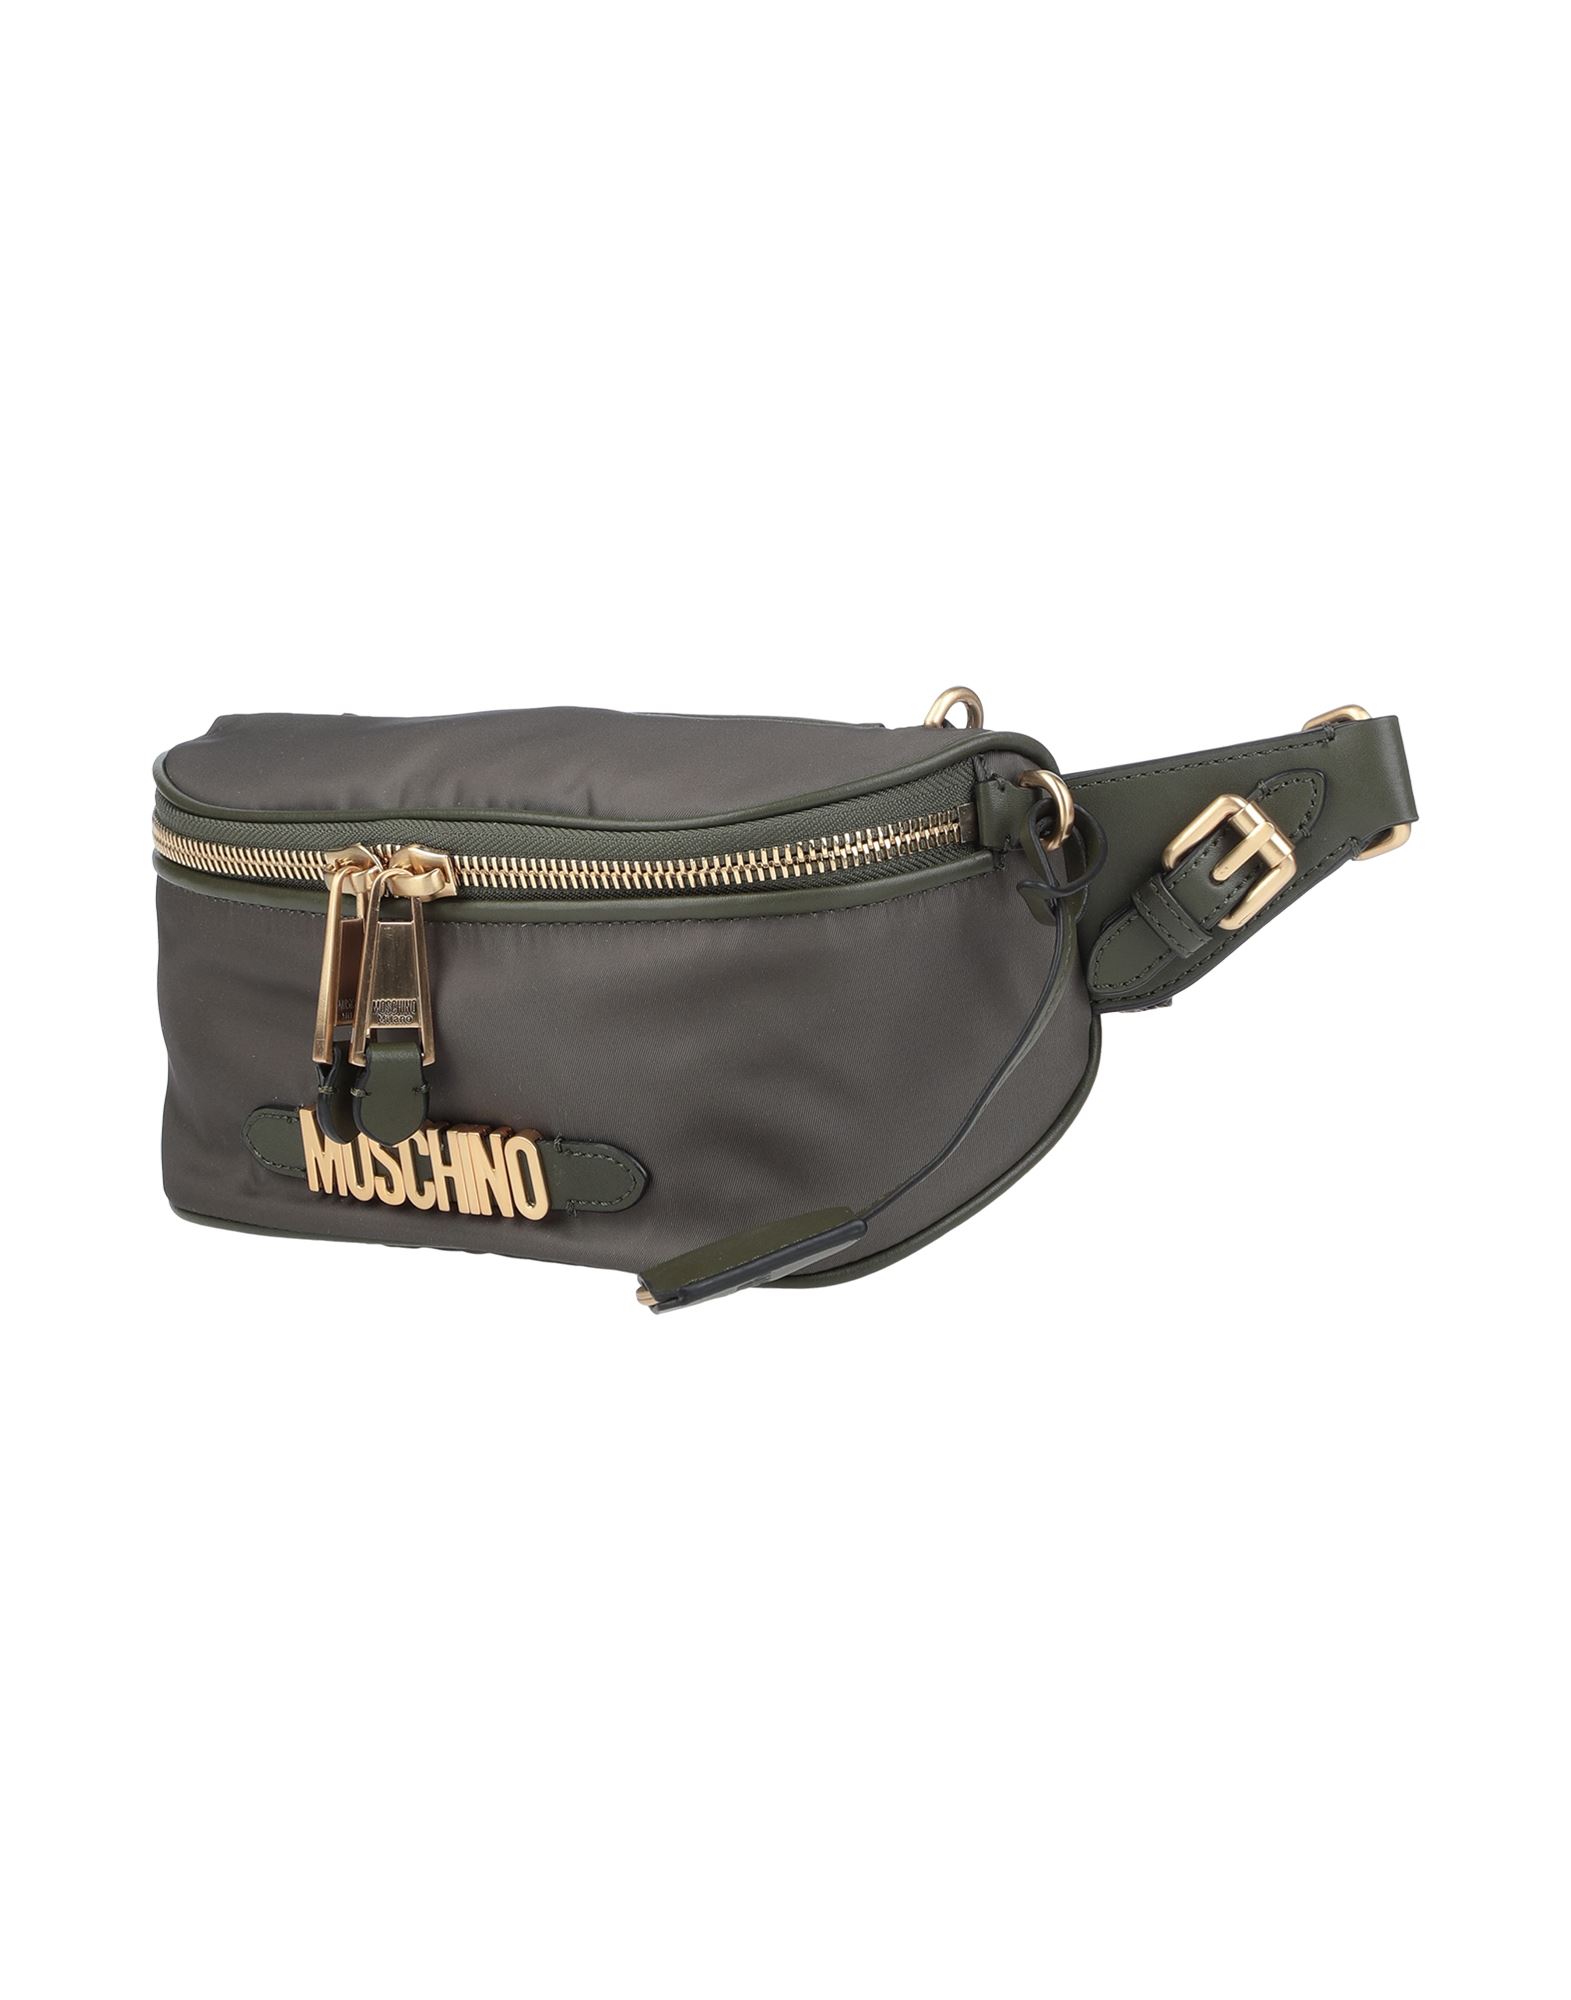 Moschino Bum Bags In Military Green